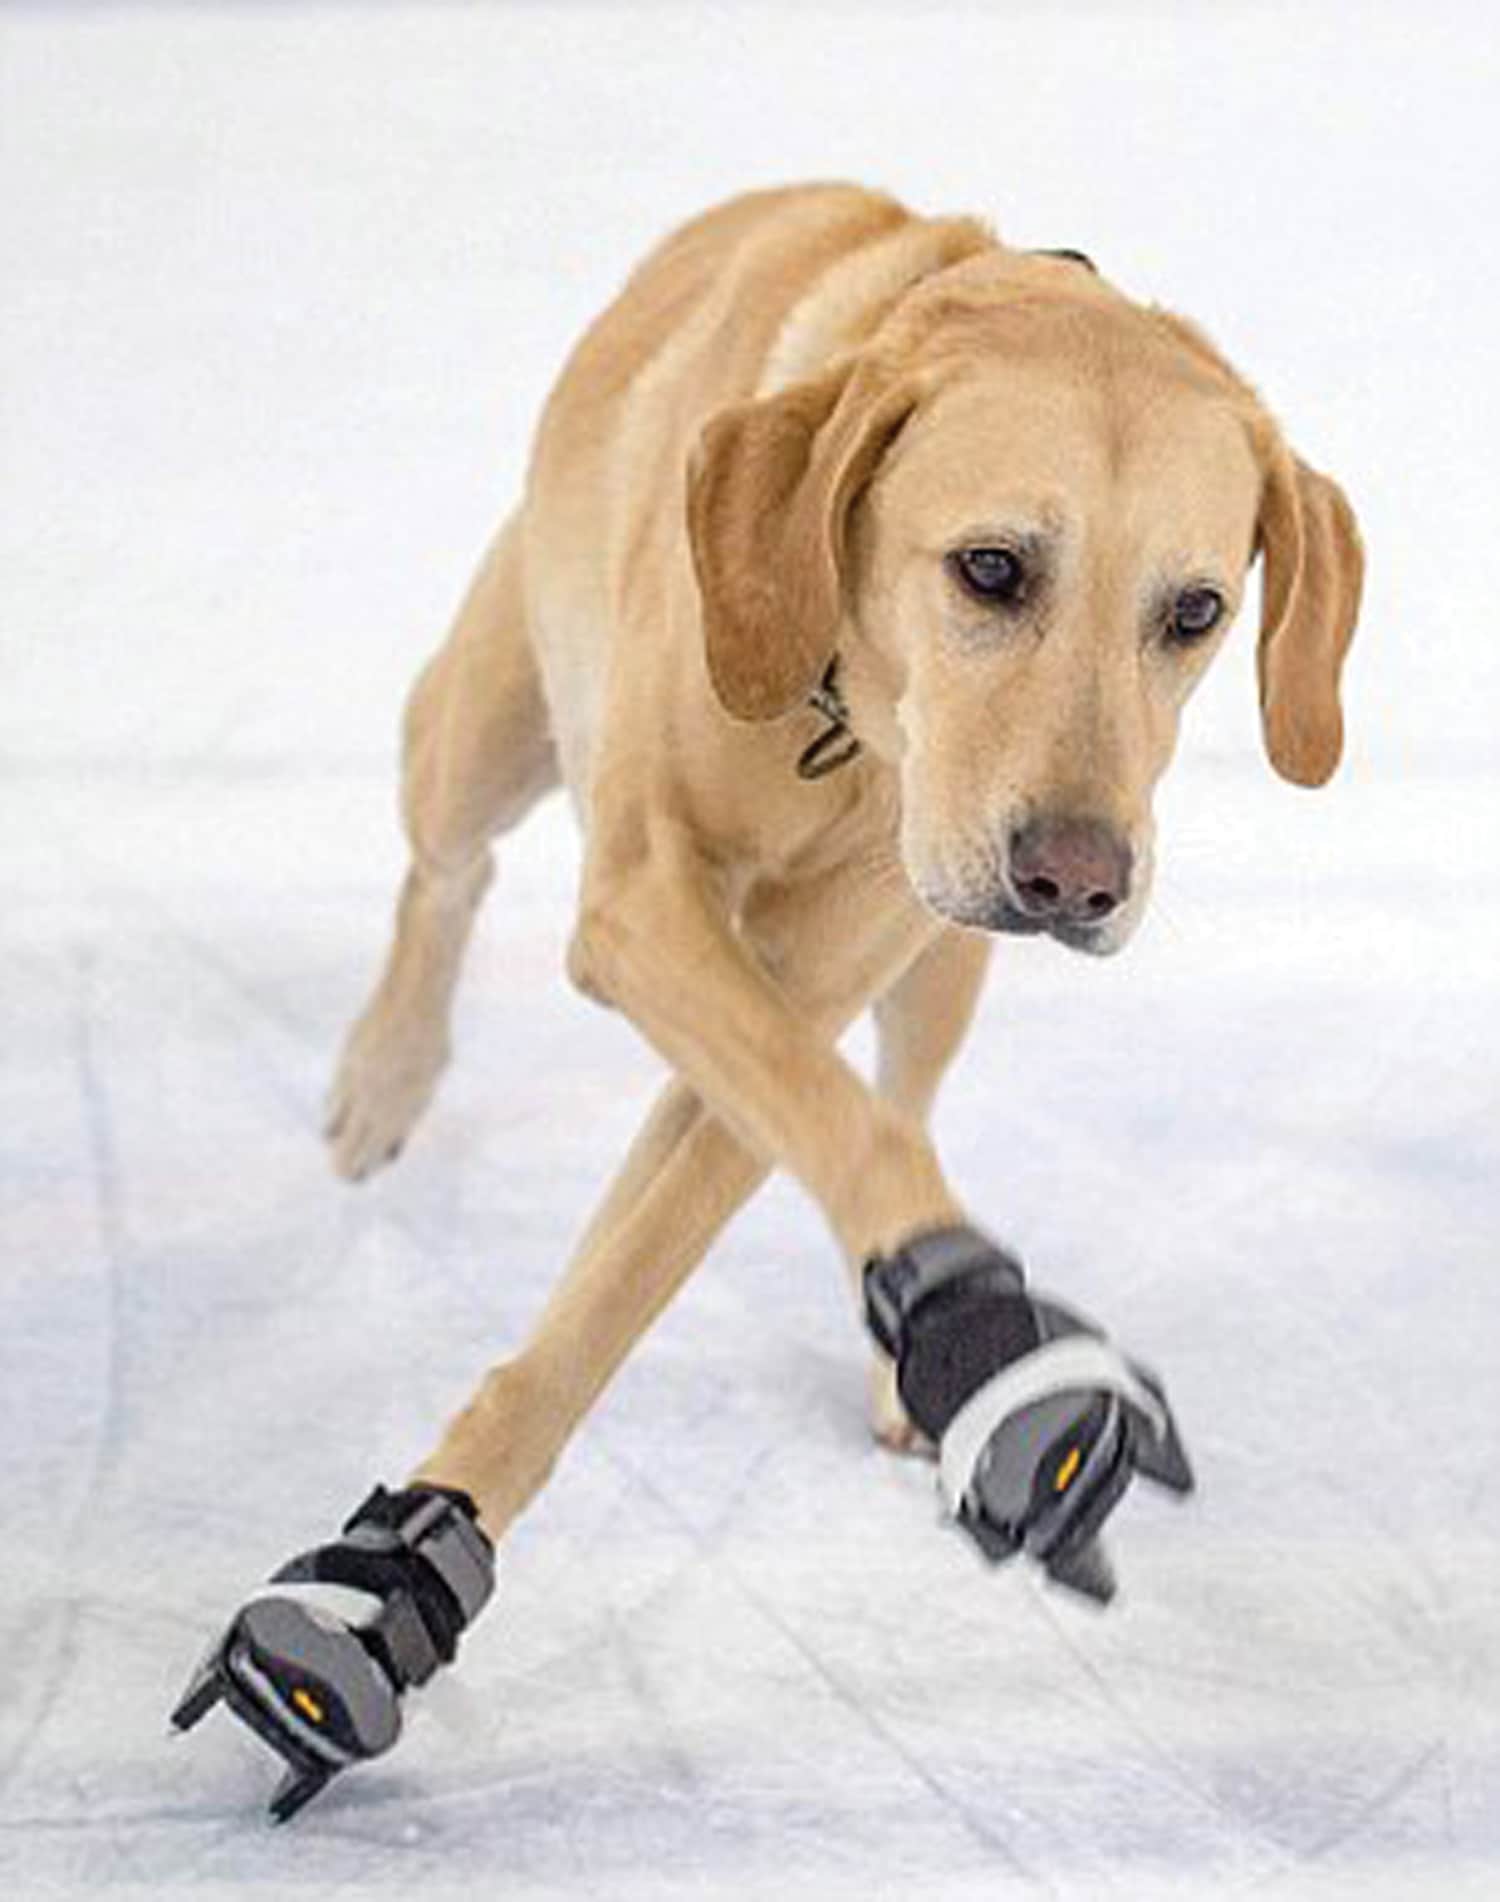 Dog dancing on ice:  The world's first ice skating dog!